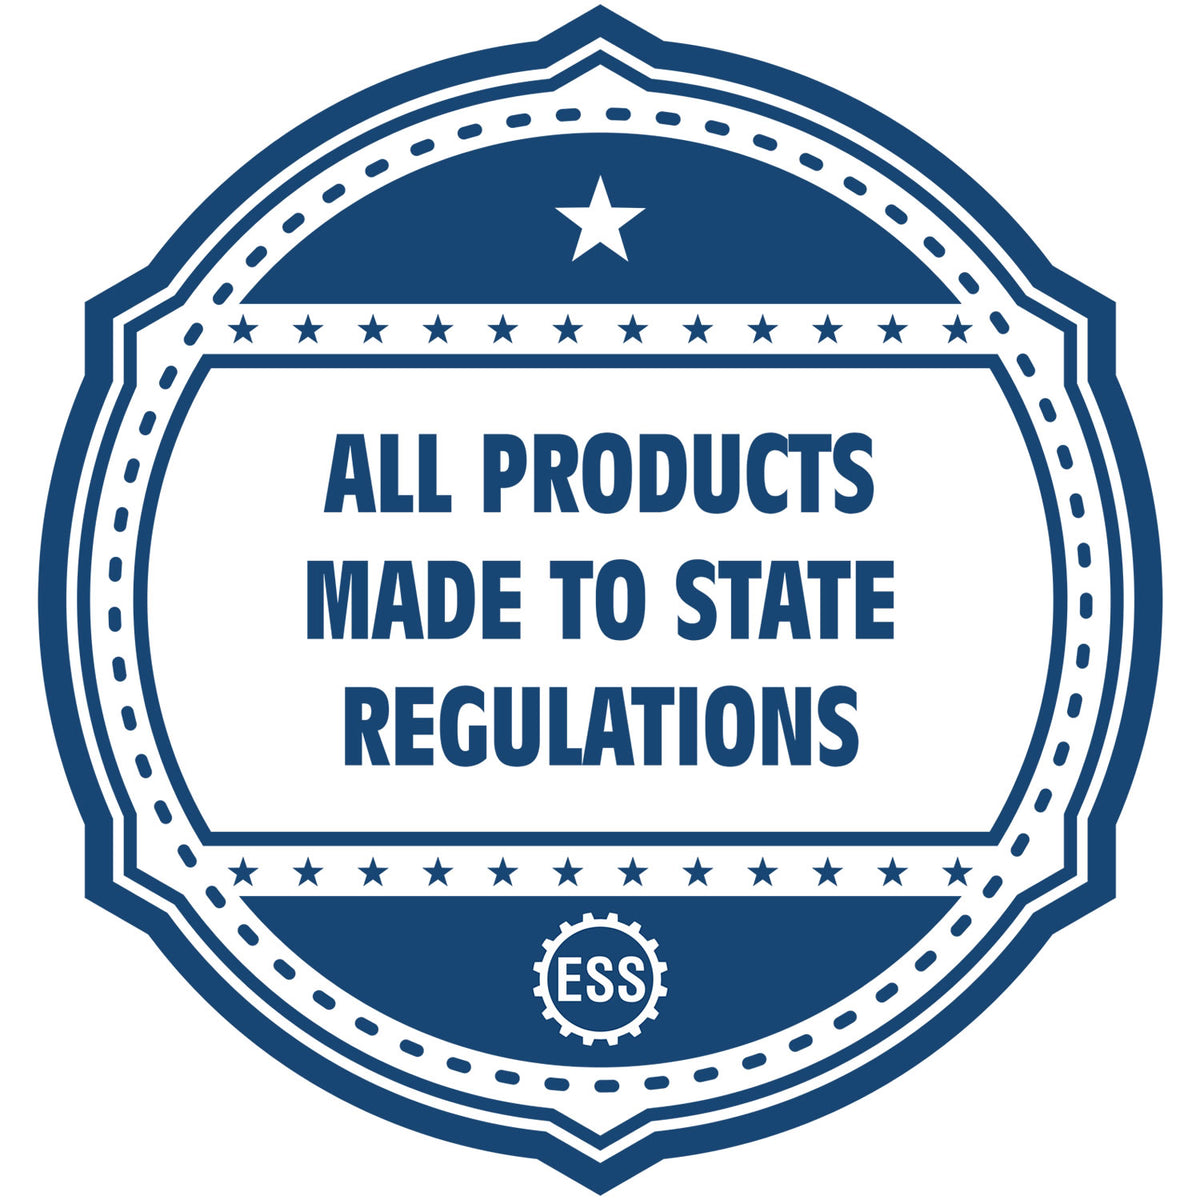 A blue icon or badge for the Gift Utah Landscape Architect Seal showing that this product is made in compliance with state regulations.